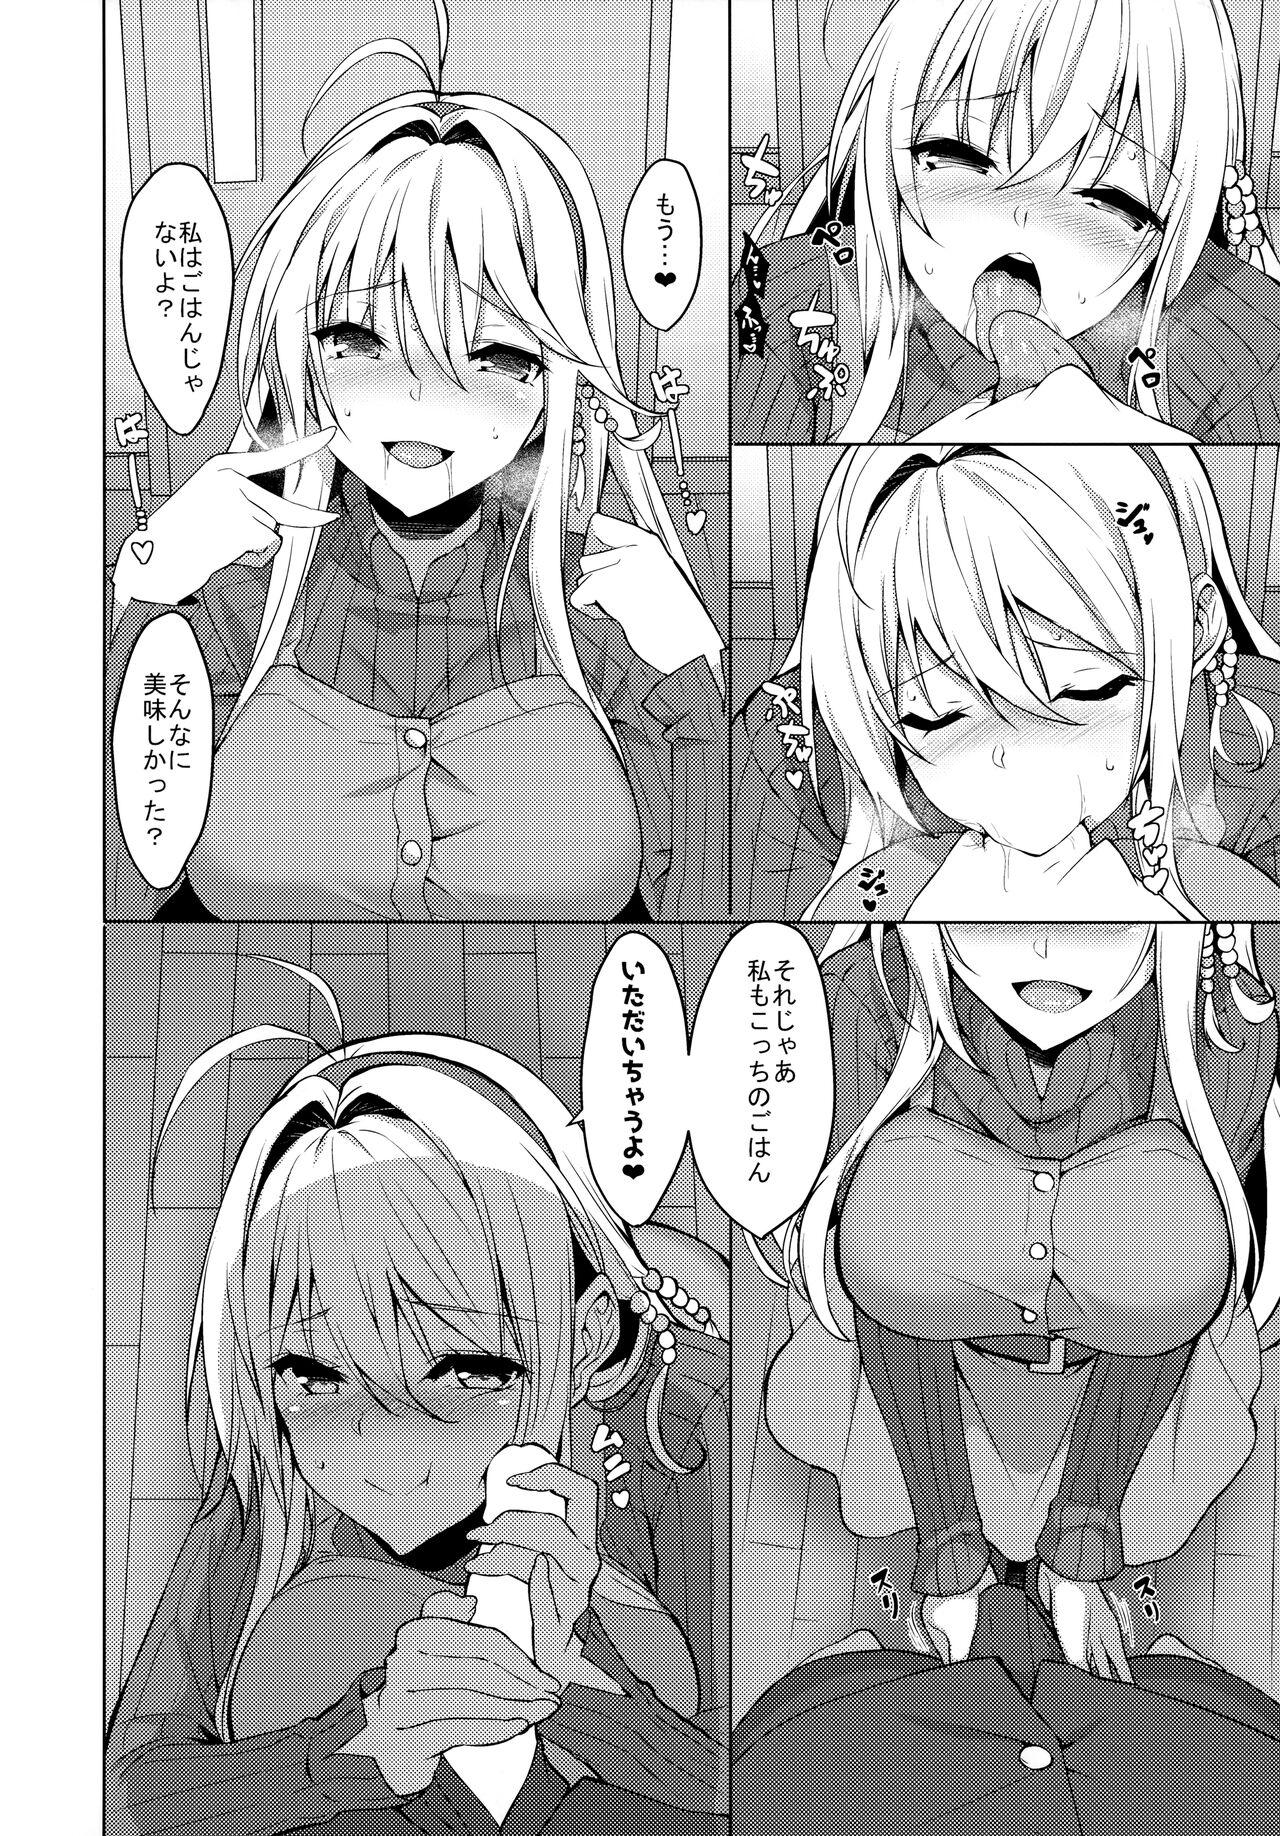 Special Locations 恋人は弦巻マキさん - Voiceroid Caliente - Page 5